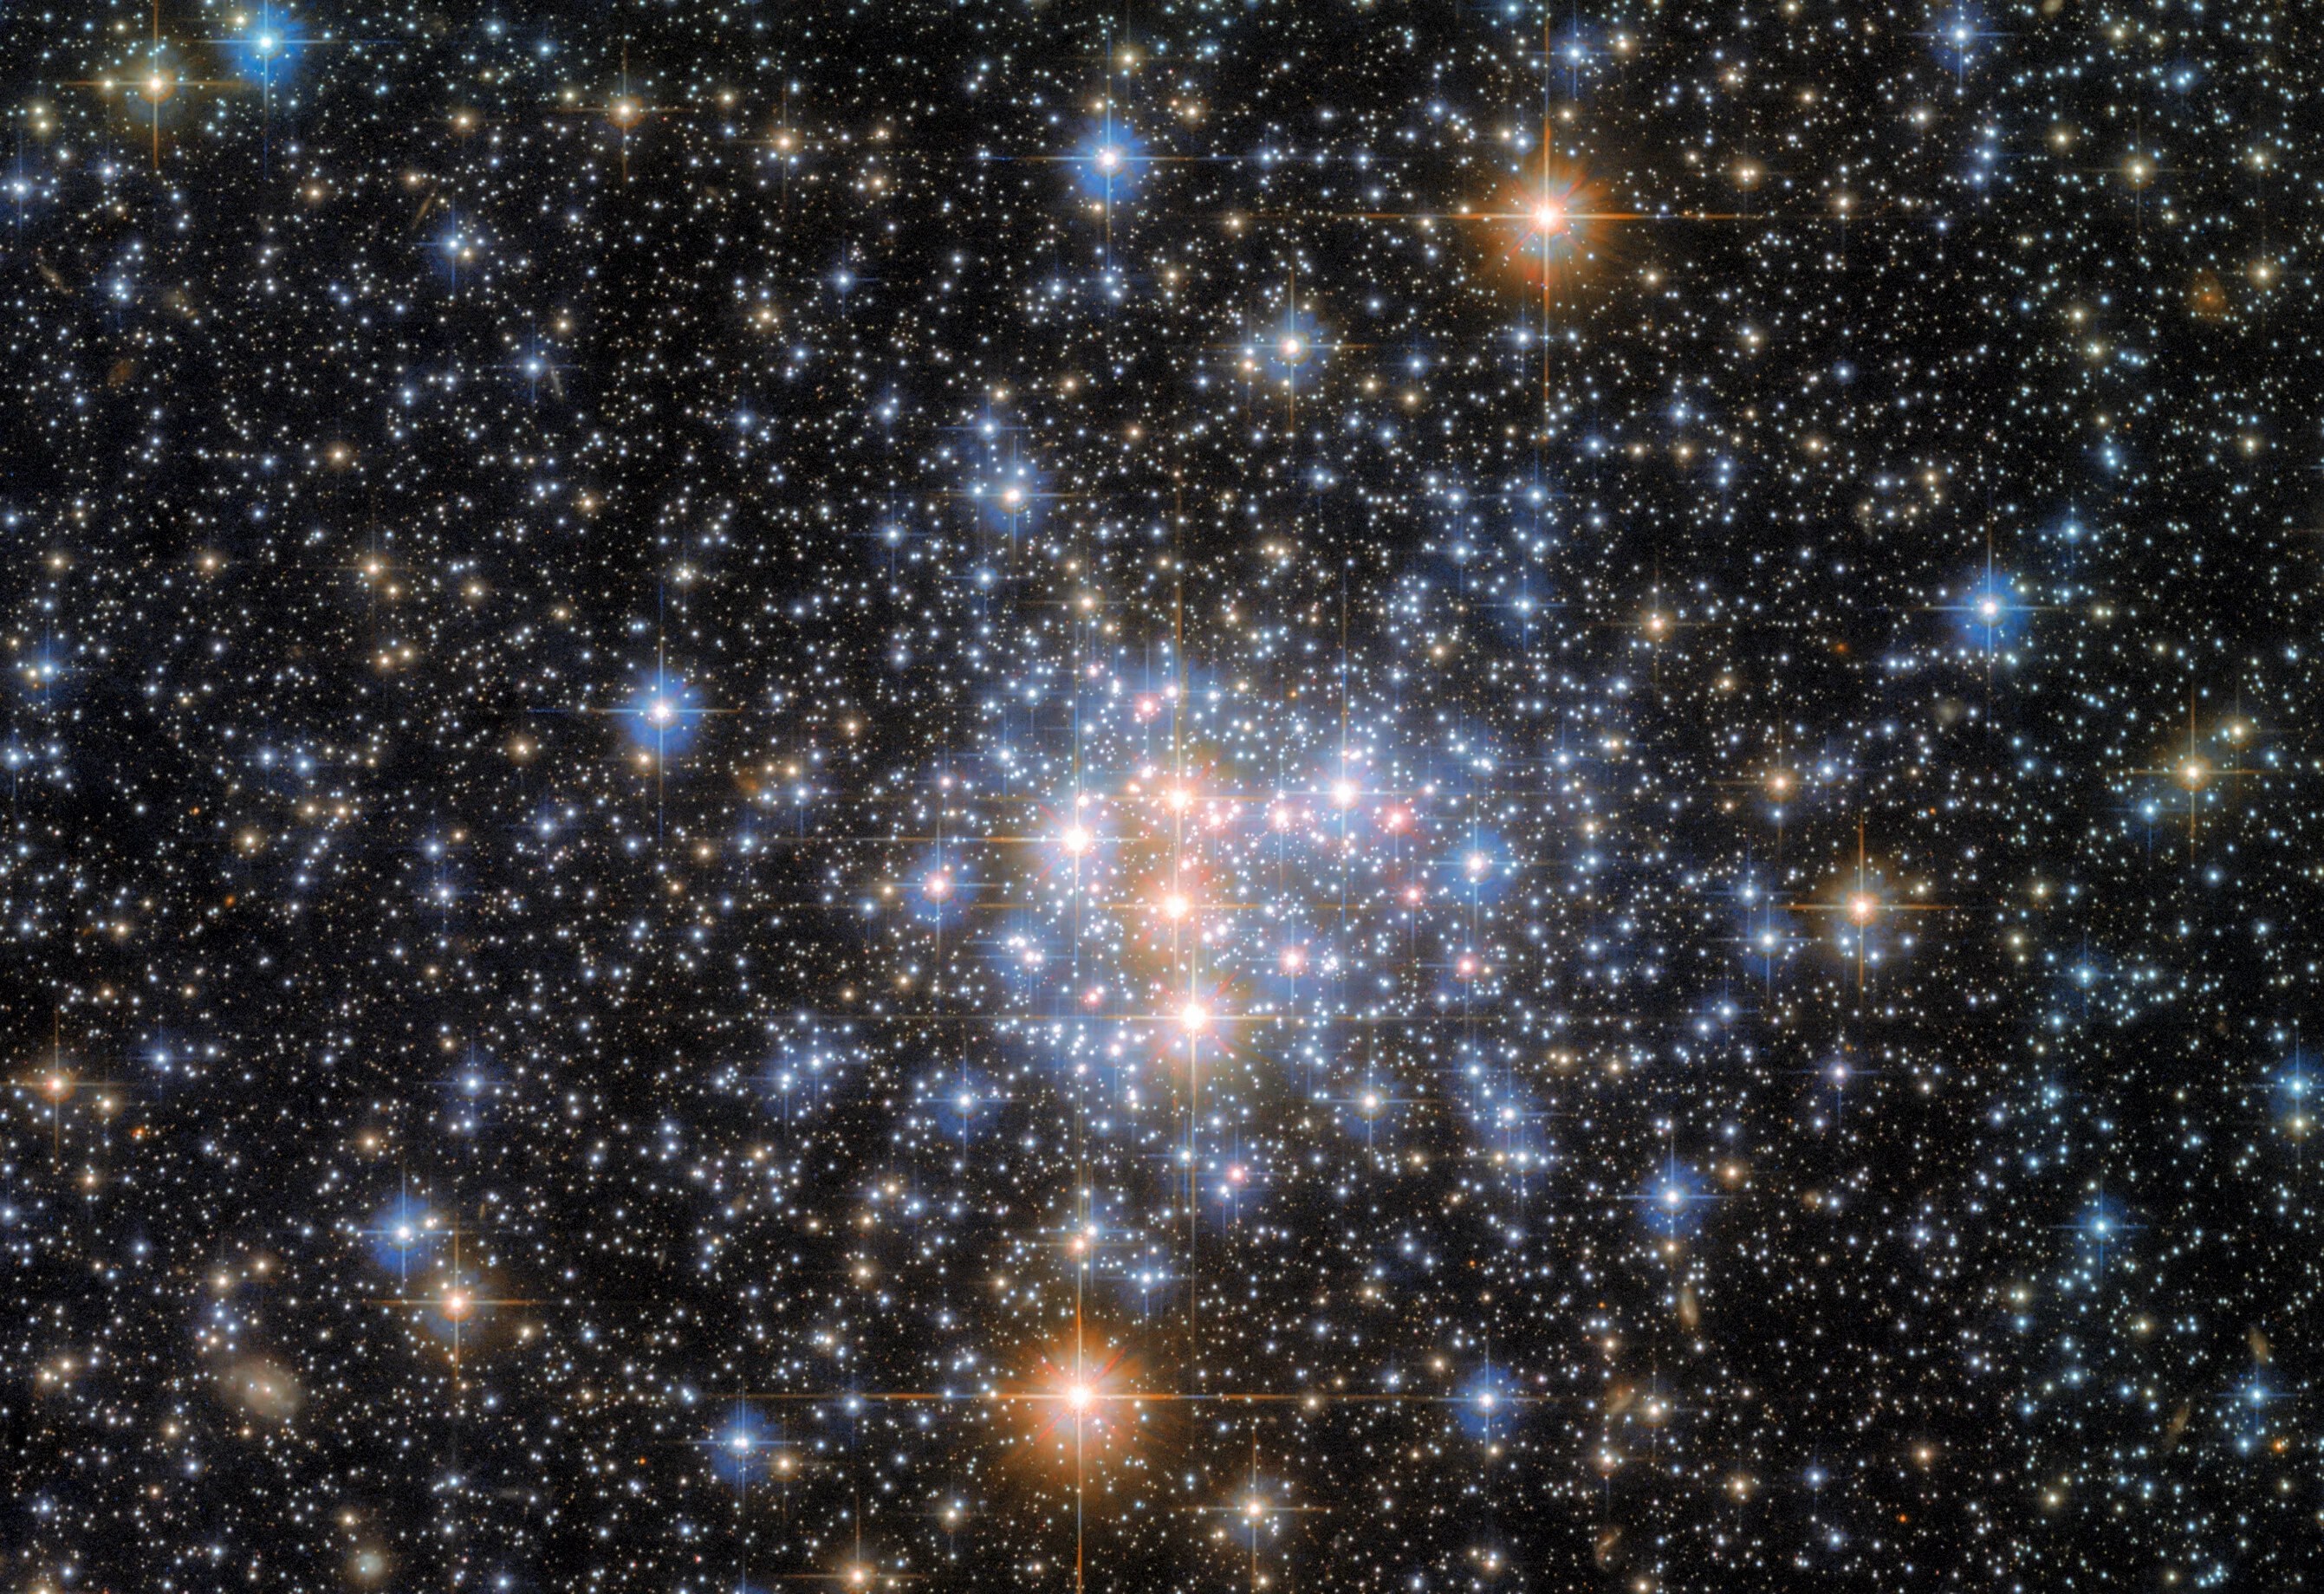 Bright stars cluster at image center. they shine in shades of white, blue, and orange, and have diffraction spikes. the stars grow more sporadic at the image’s edges, and several smaller, more distant stars glow against a black backdrop of space.